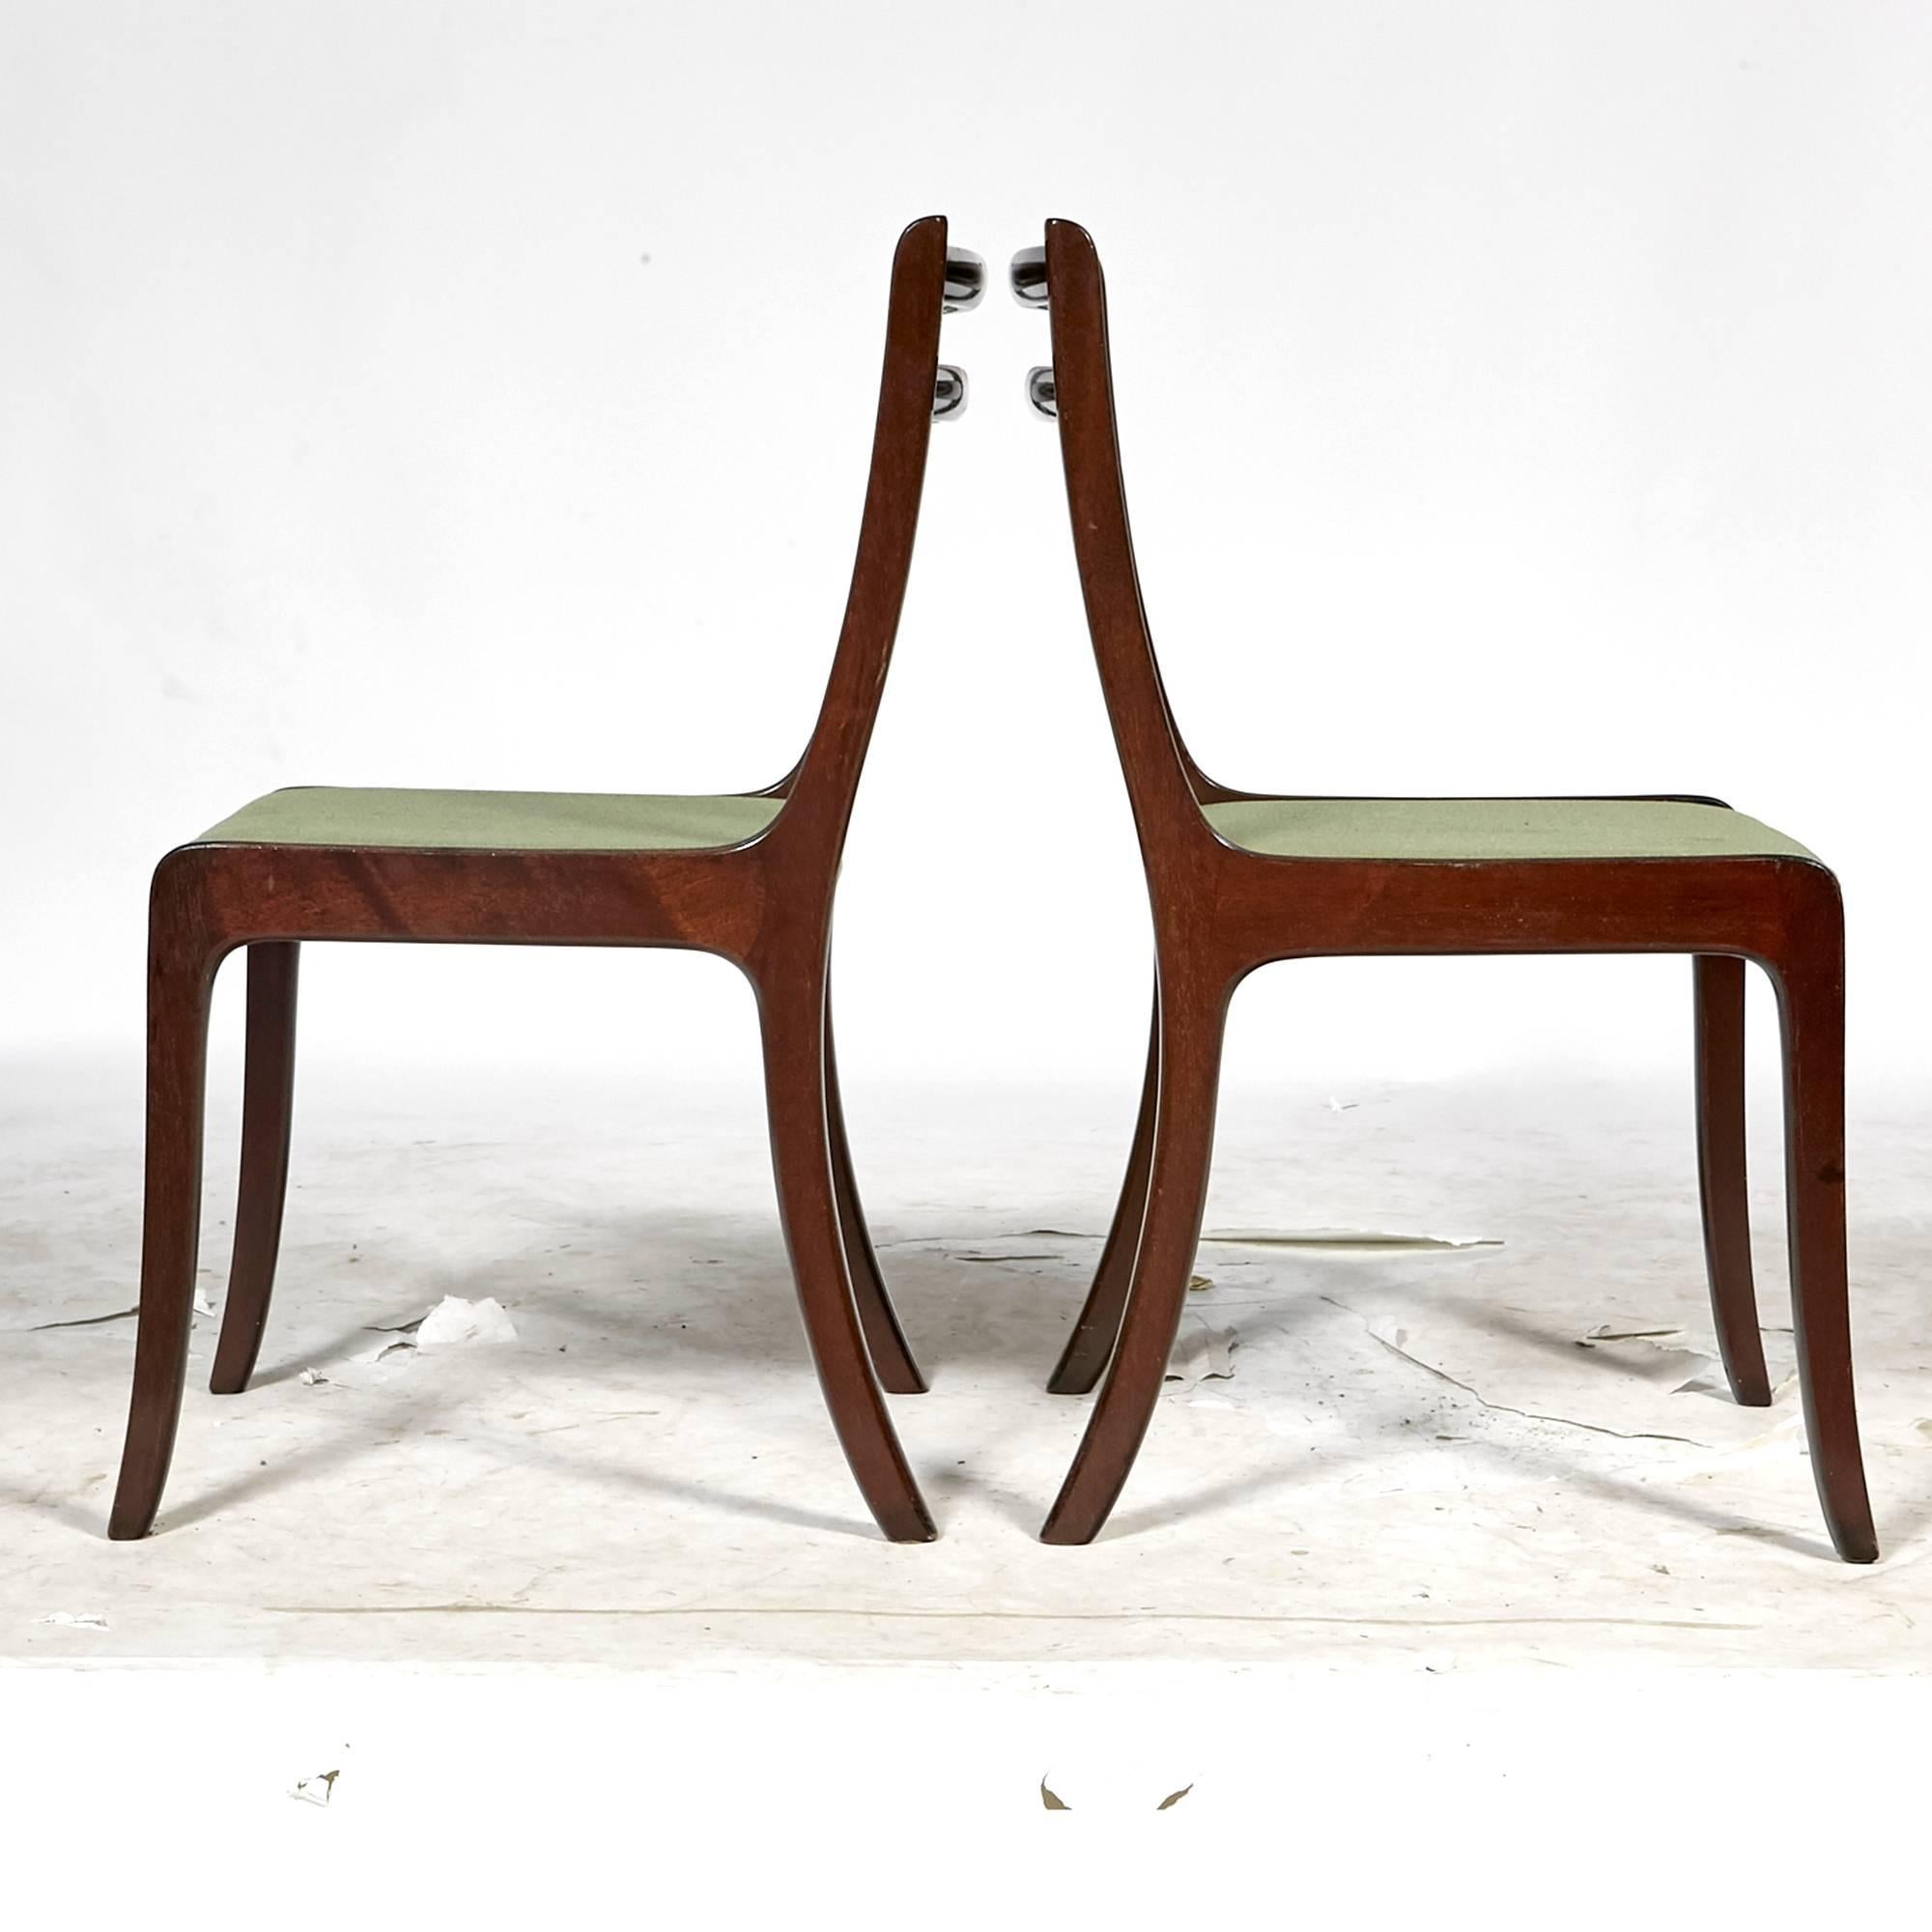 Danish Mahogany Dining Chairs by Ole Wanscher for Poul Jeppesen, 1960s For Sale 2